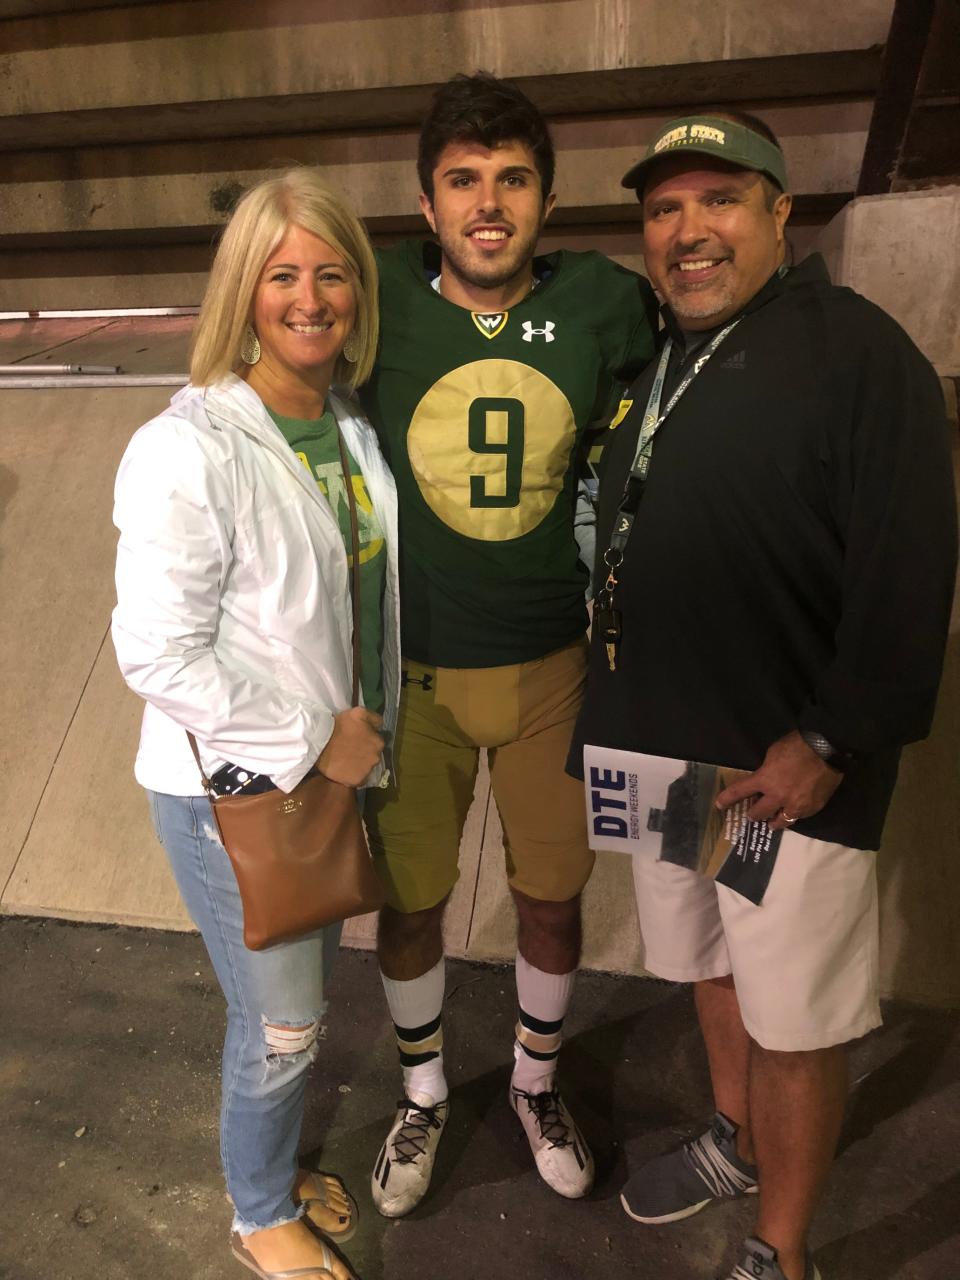 Brady Hessbrook poses with his Kristy, left, and Terry, right, after a Wayne State football game.